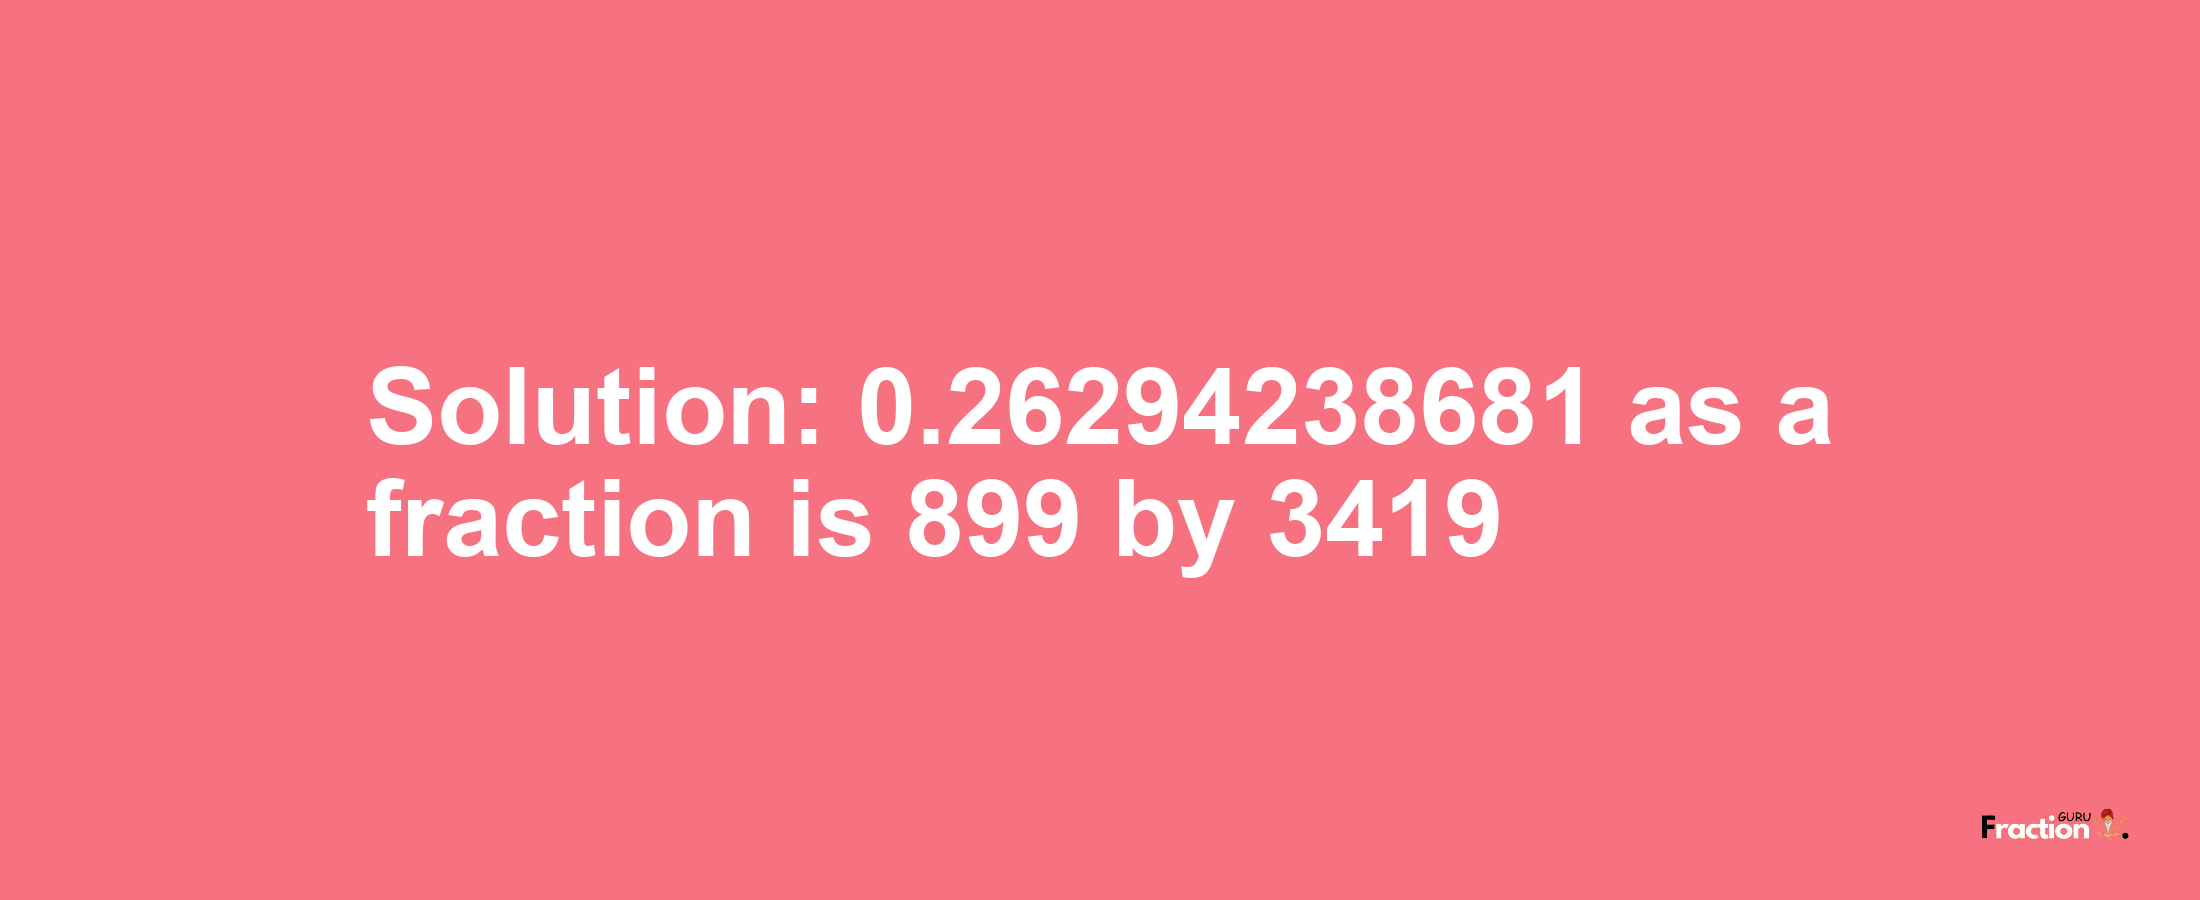 Solution:0.26294238681 as a fraction is 899/3419